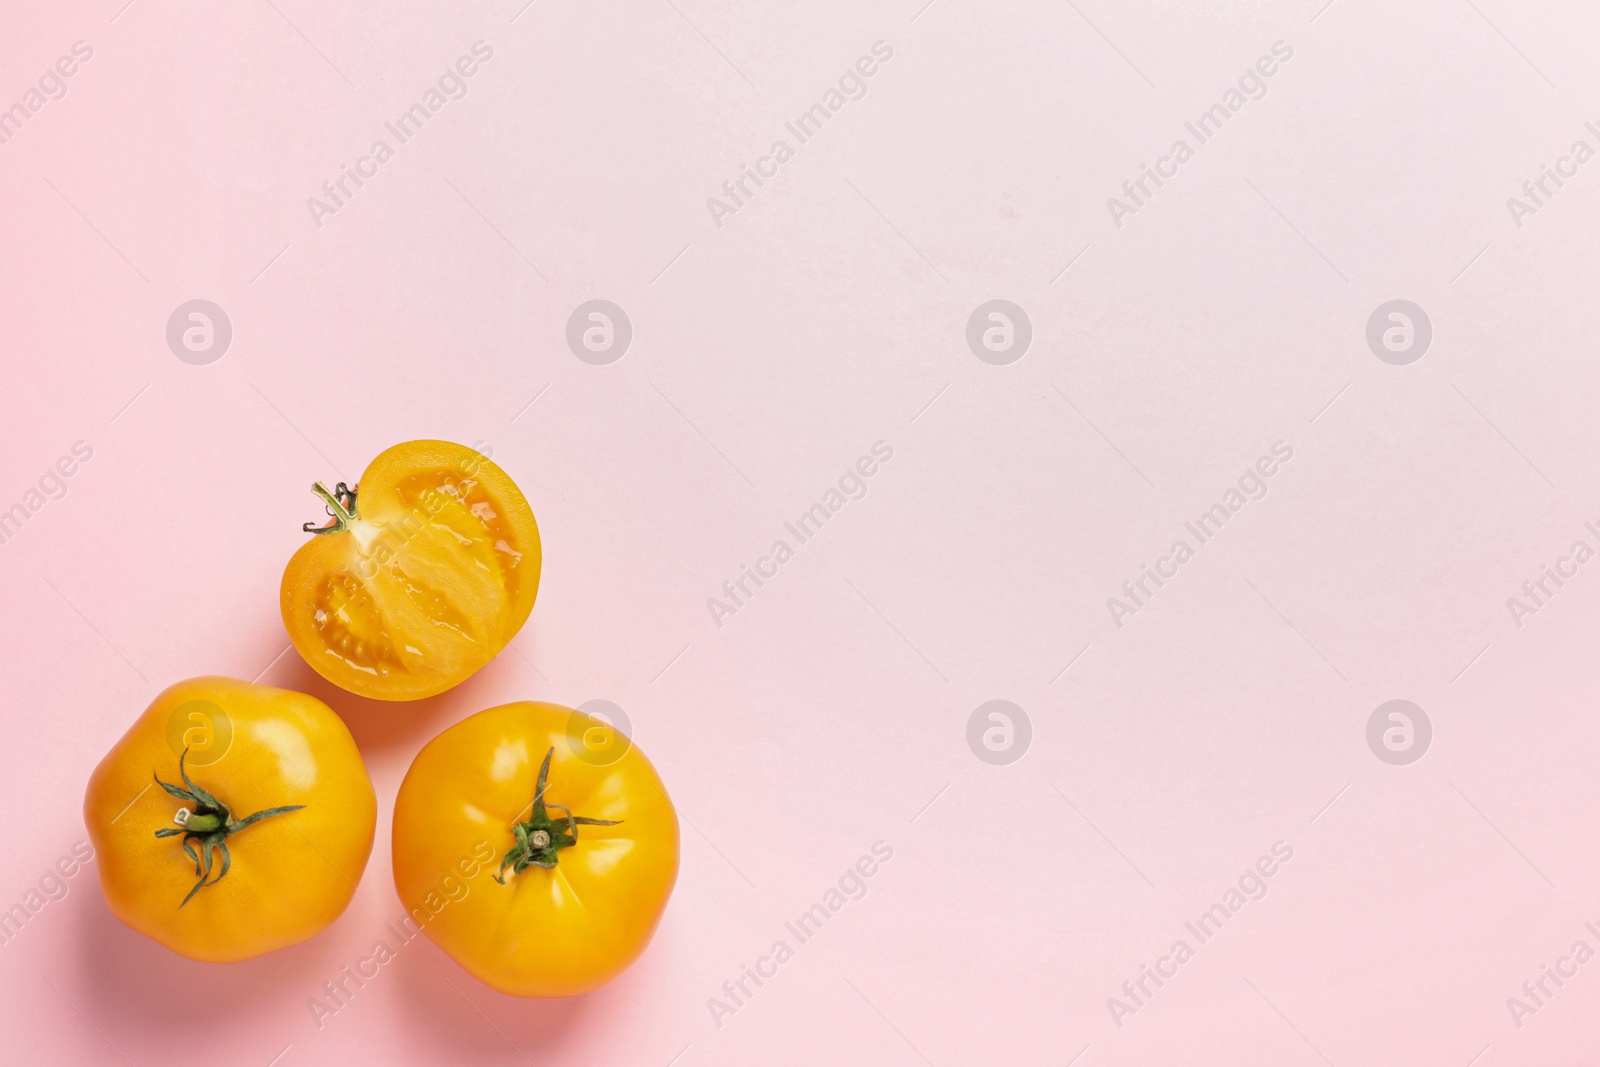 Photo of Cut and whole ripe yellow tomatoes on pink background, flat lay. Space for text